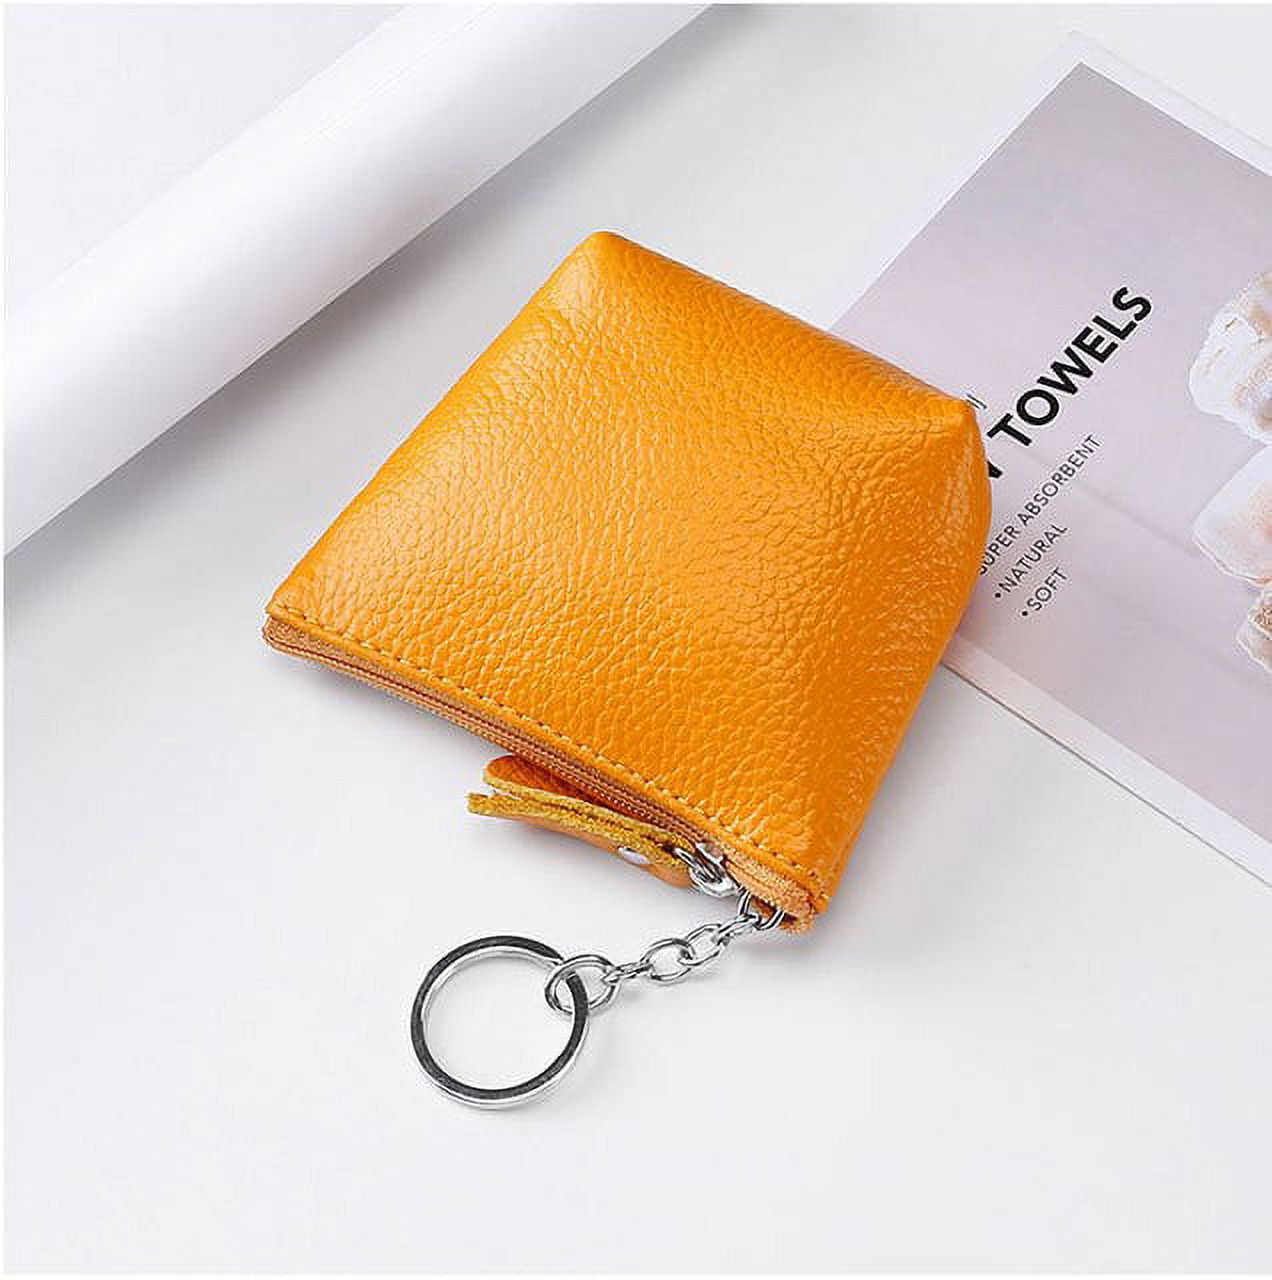 Buy Handmade Leather Coin Purse, Coin Bag, Vintage Style, Small Veritable Leather  Wallet, Pouch for Women Men Online in India - Etsy